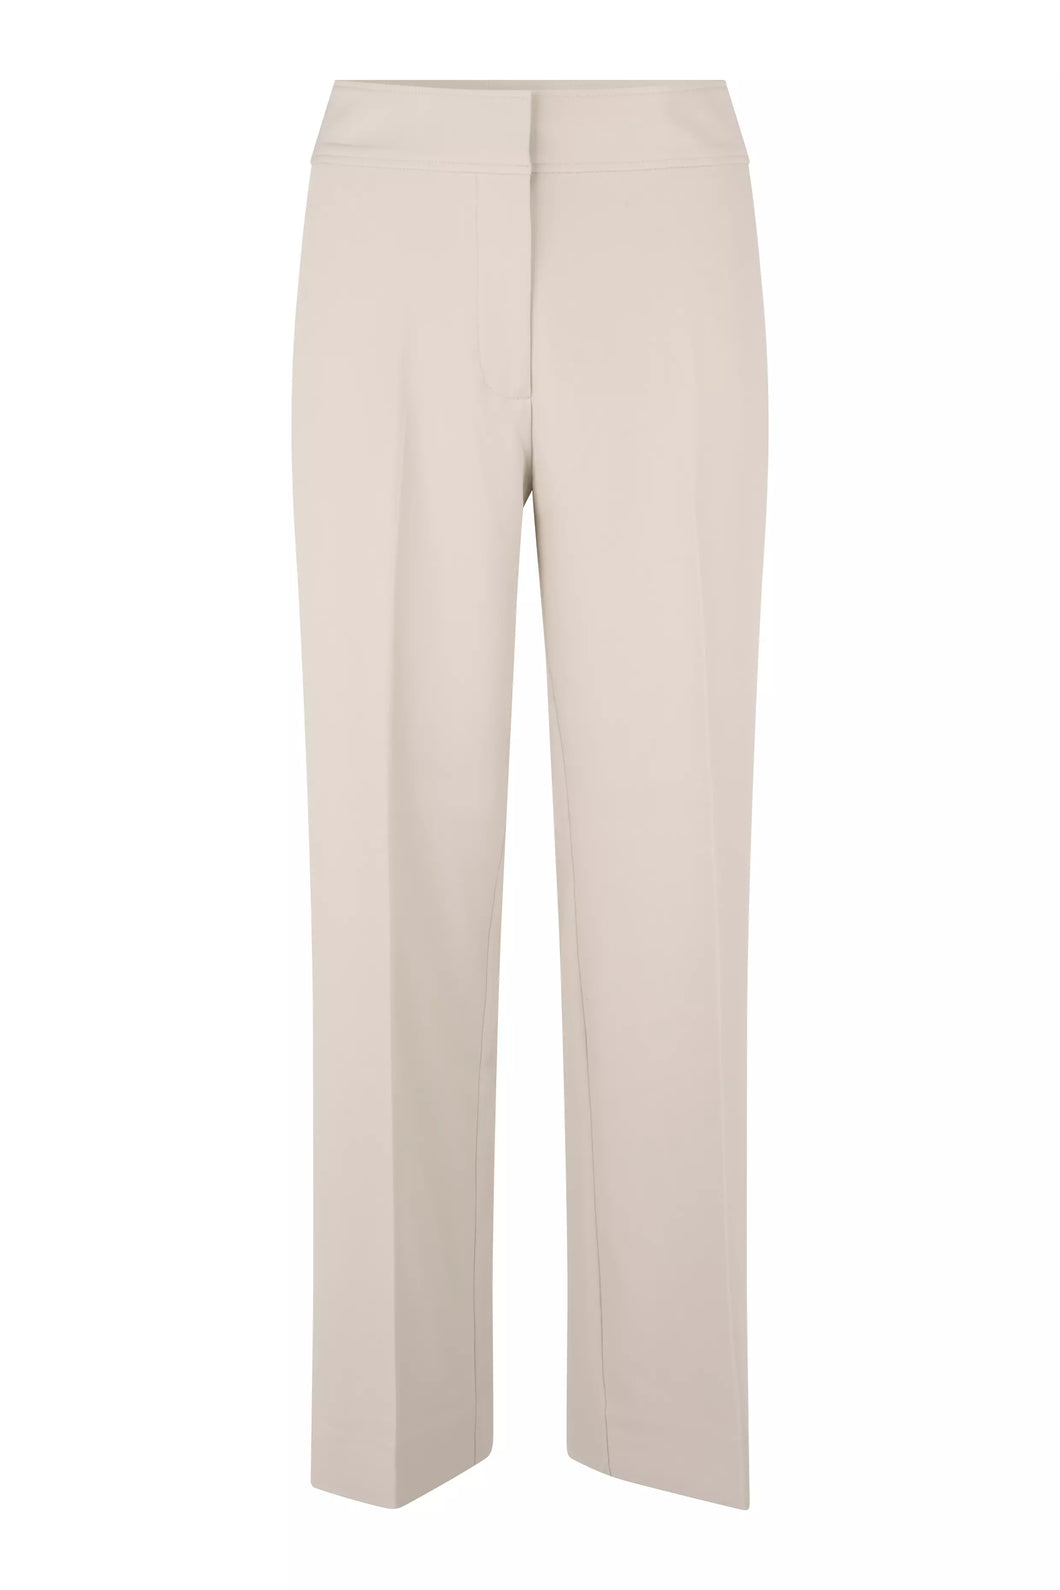 EVIEN TROUSERS - SECOND FEMALE